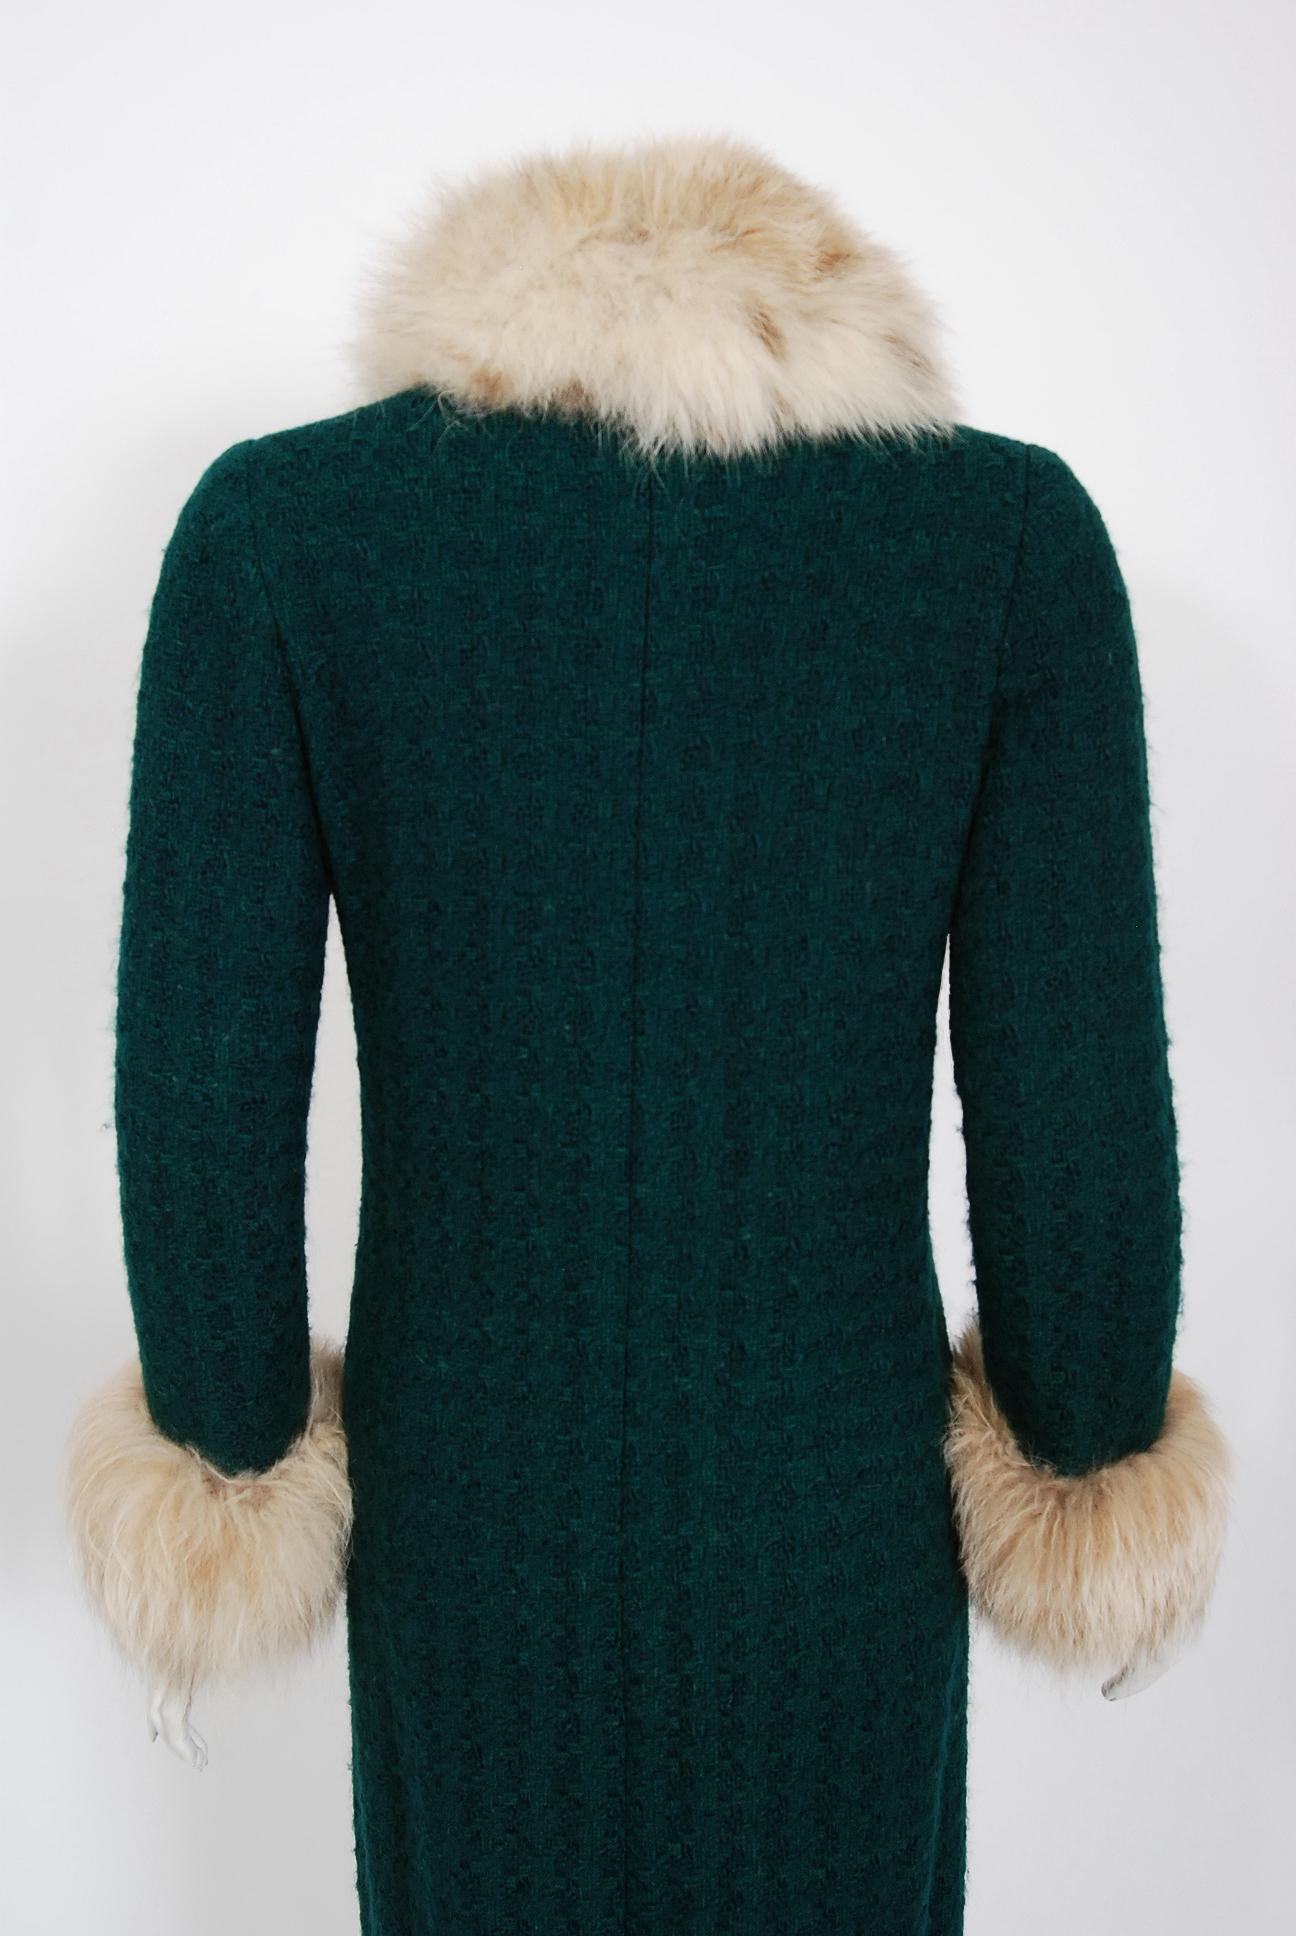 Vintage 1974 Chanel Haute-Couture Forest Green Boucle Wool & Fox-Fur Jacket Coat 3